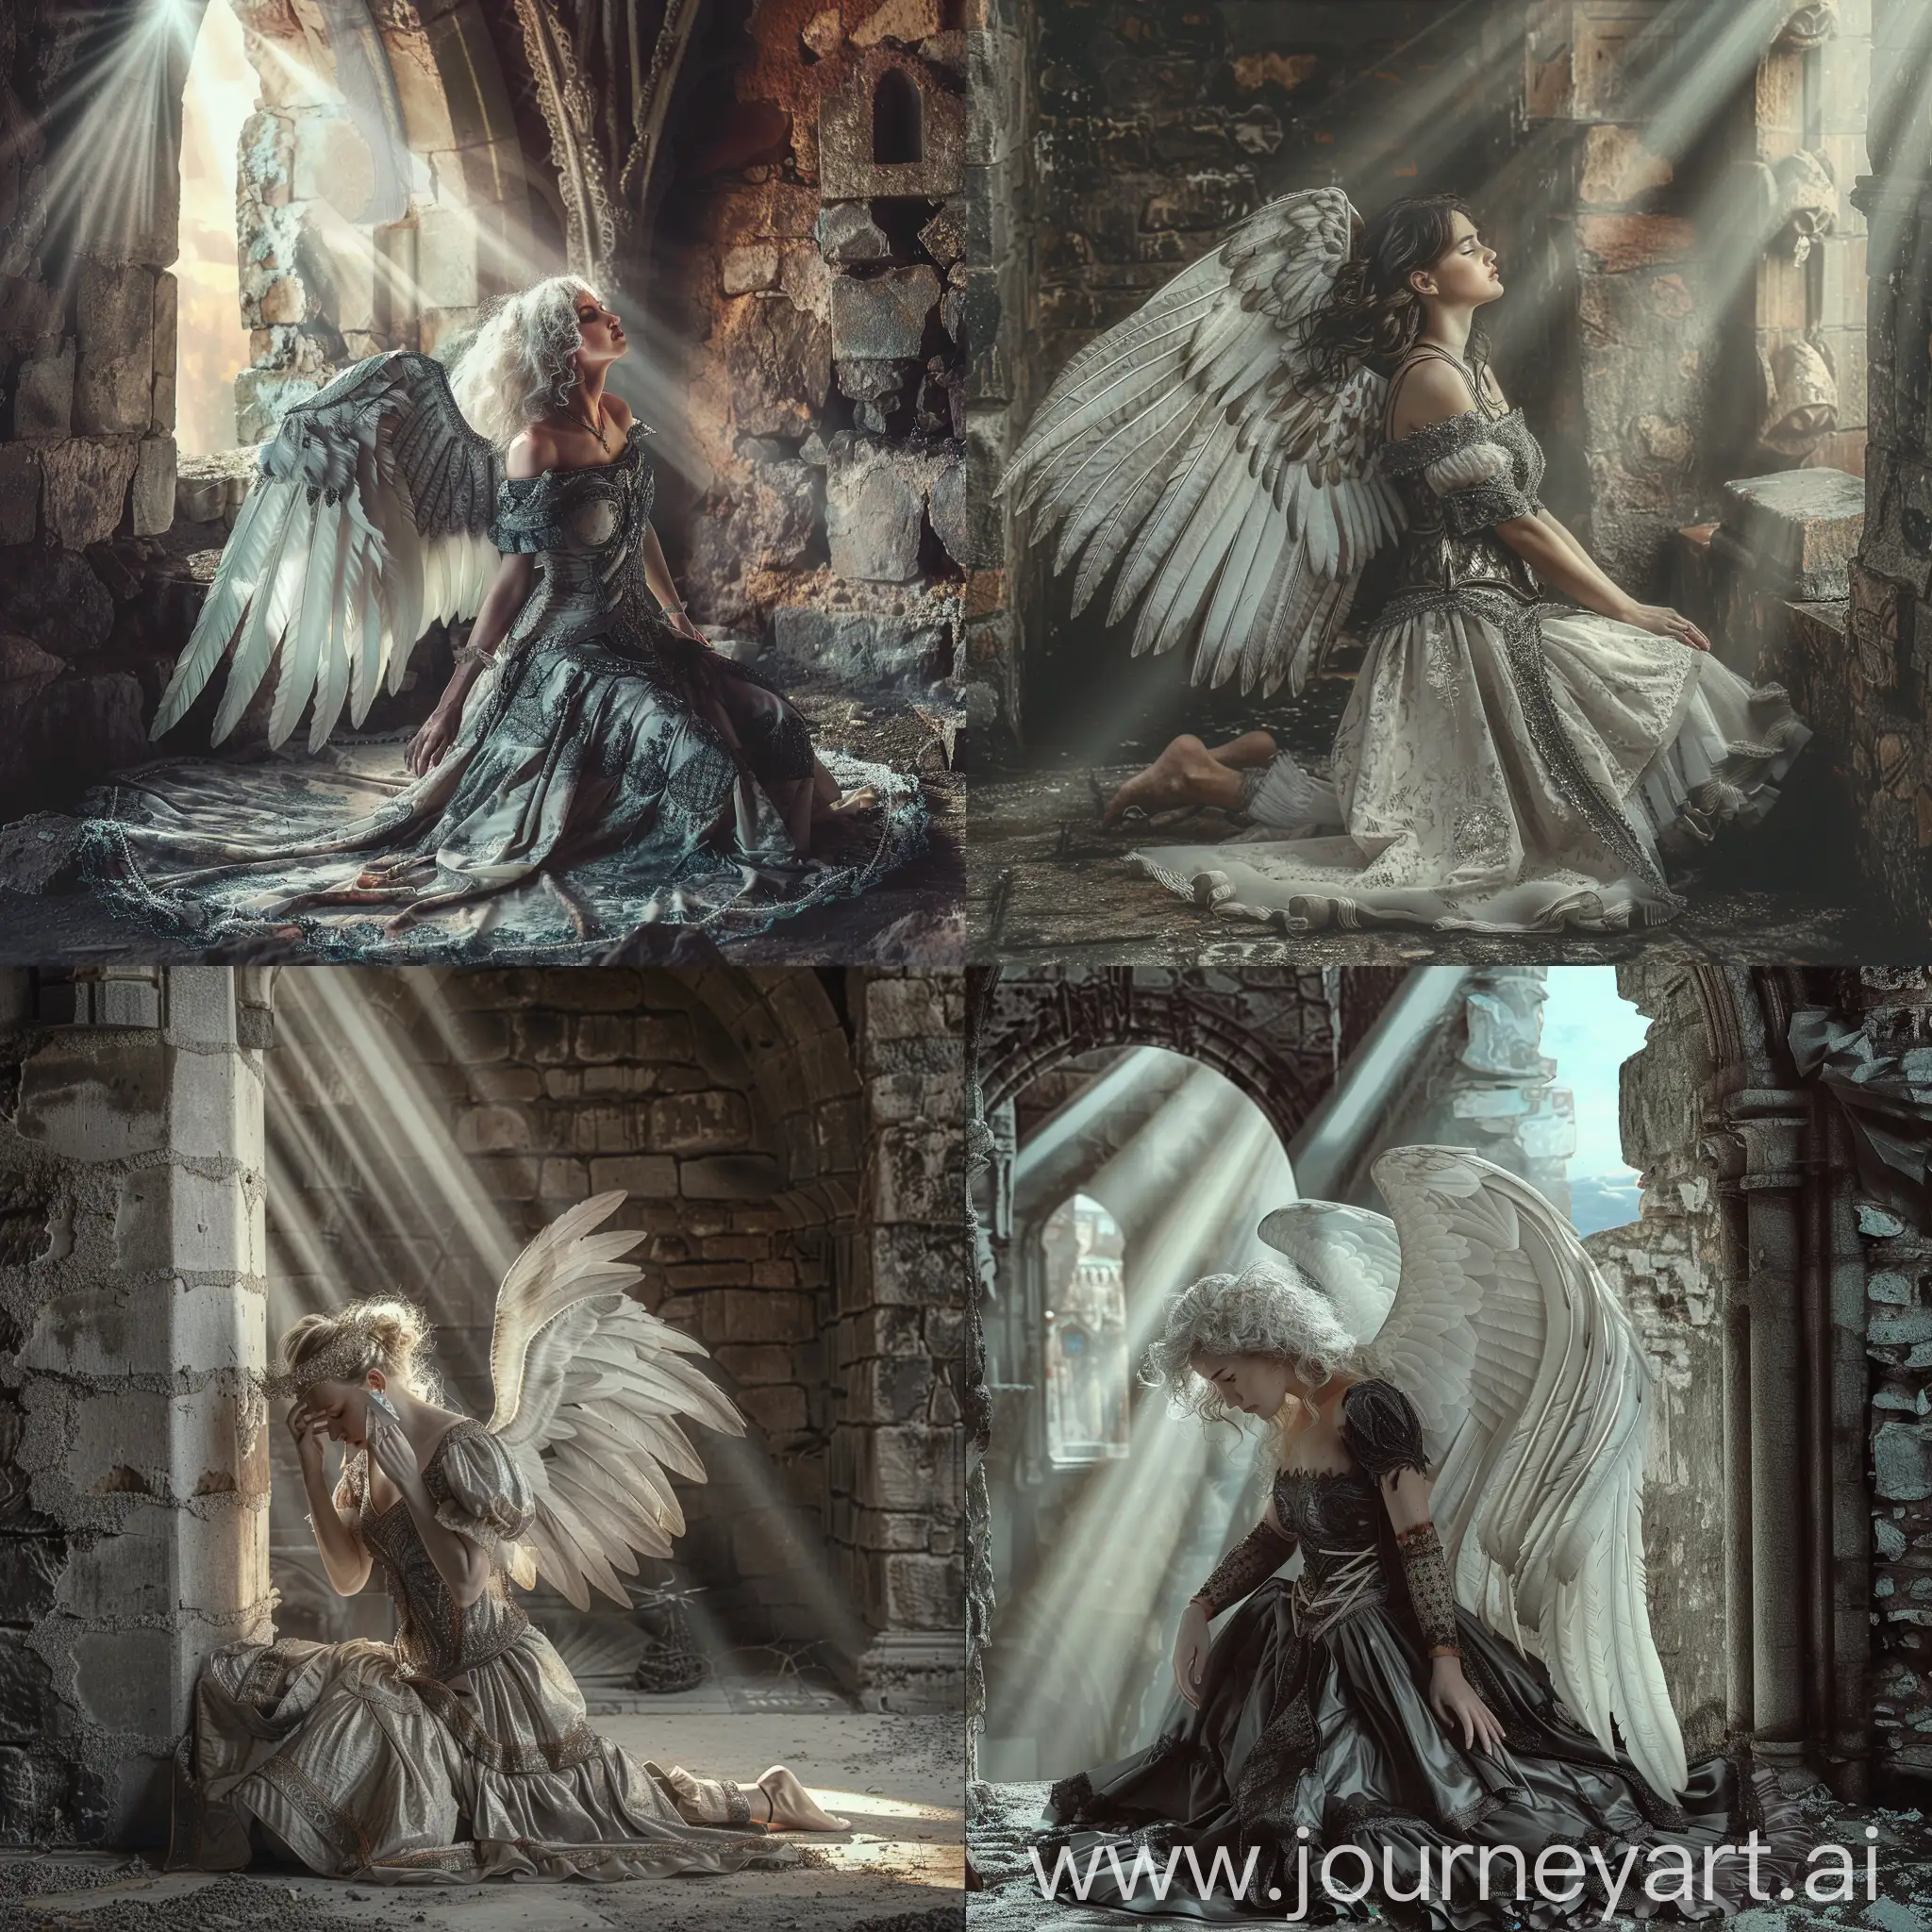 Angelic-Figure-in-Medieval-Attire-Praying-in-a-Stone-Castle